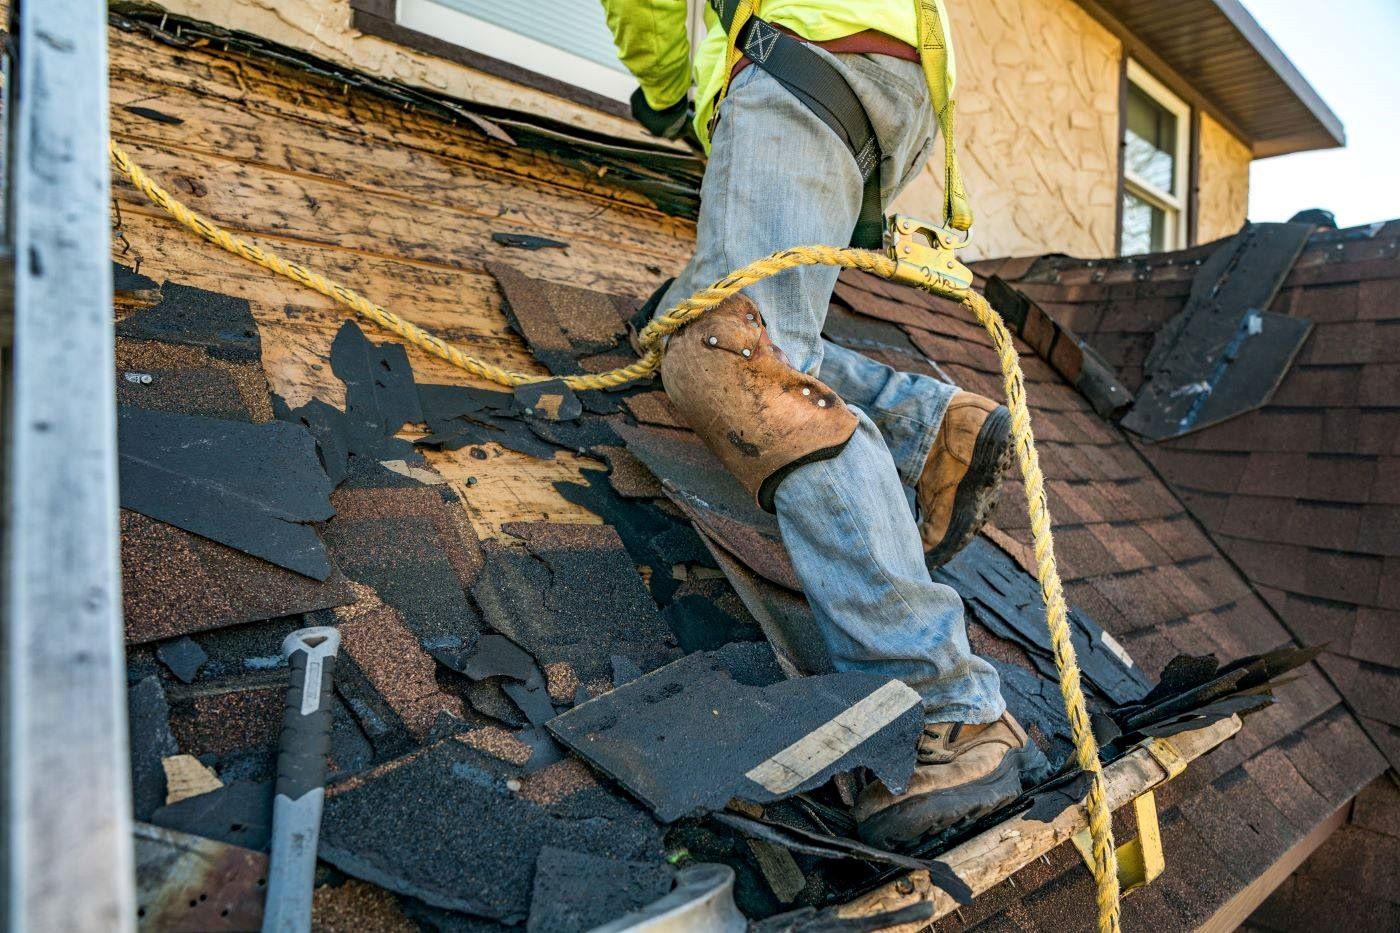  roofer removing old roof shingles